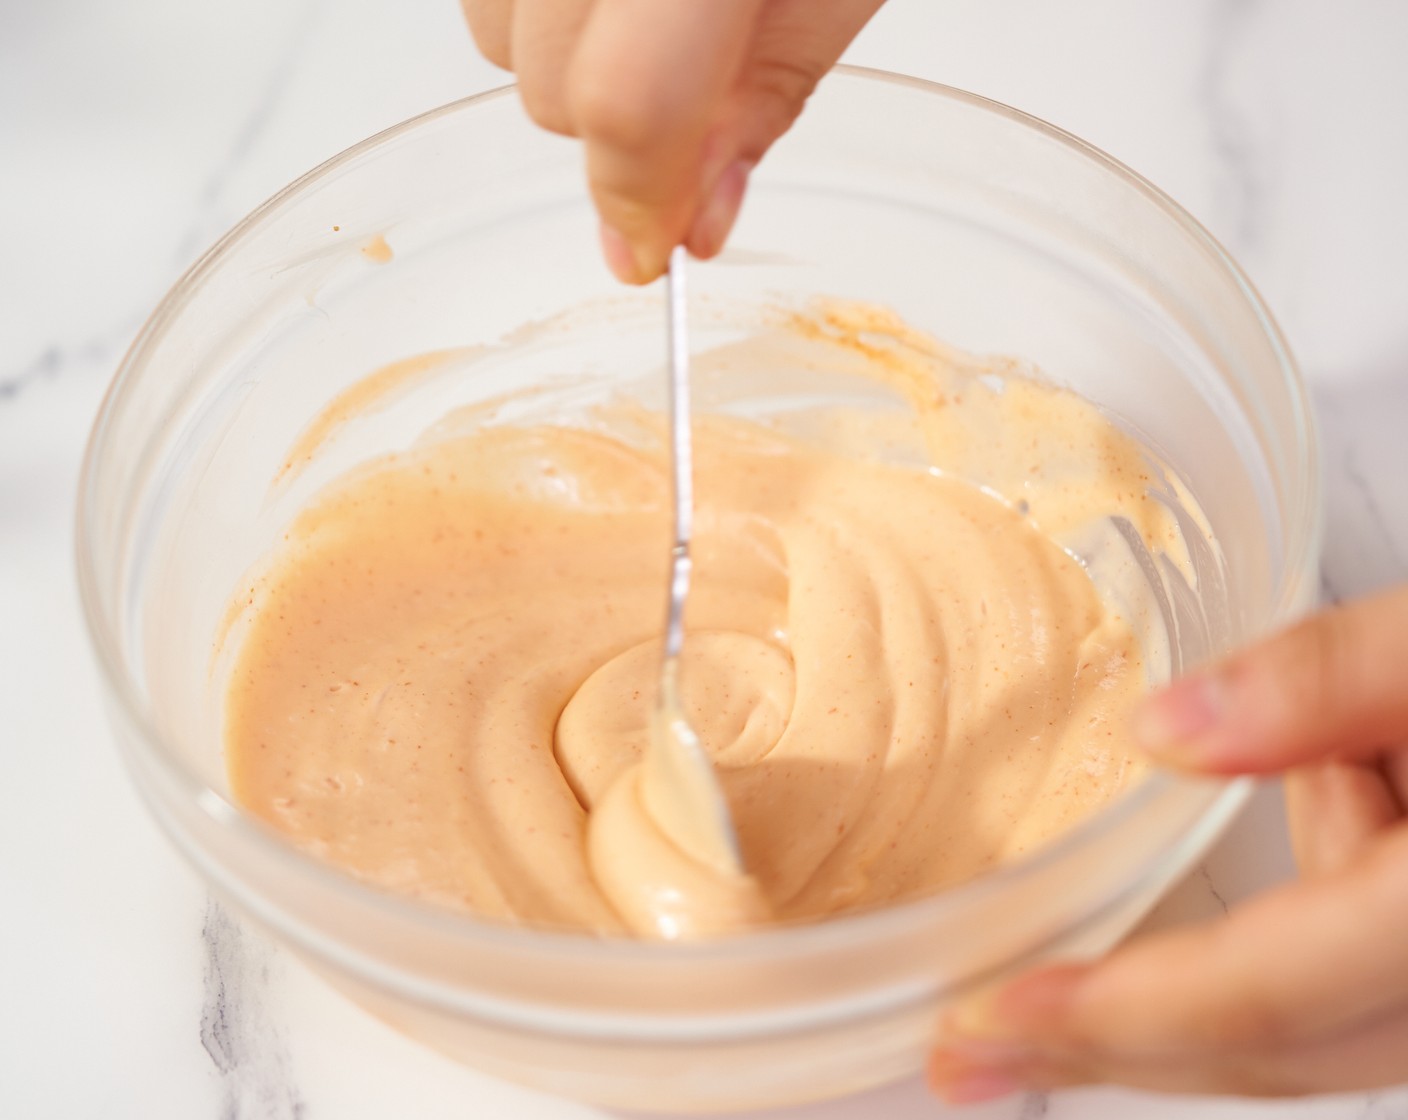 step 4 To make the Spicy Mayonnaise, mix the Mayonnaise (1/2 cup) with Sriracha (2 Tbsp) in a separate bowl. Set aside in the fridge.